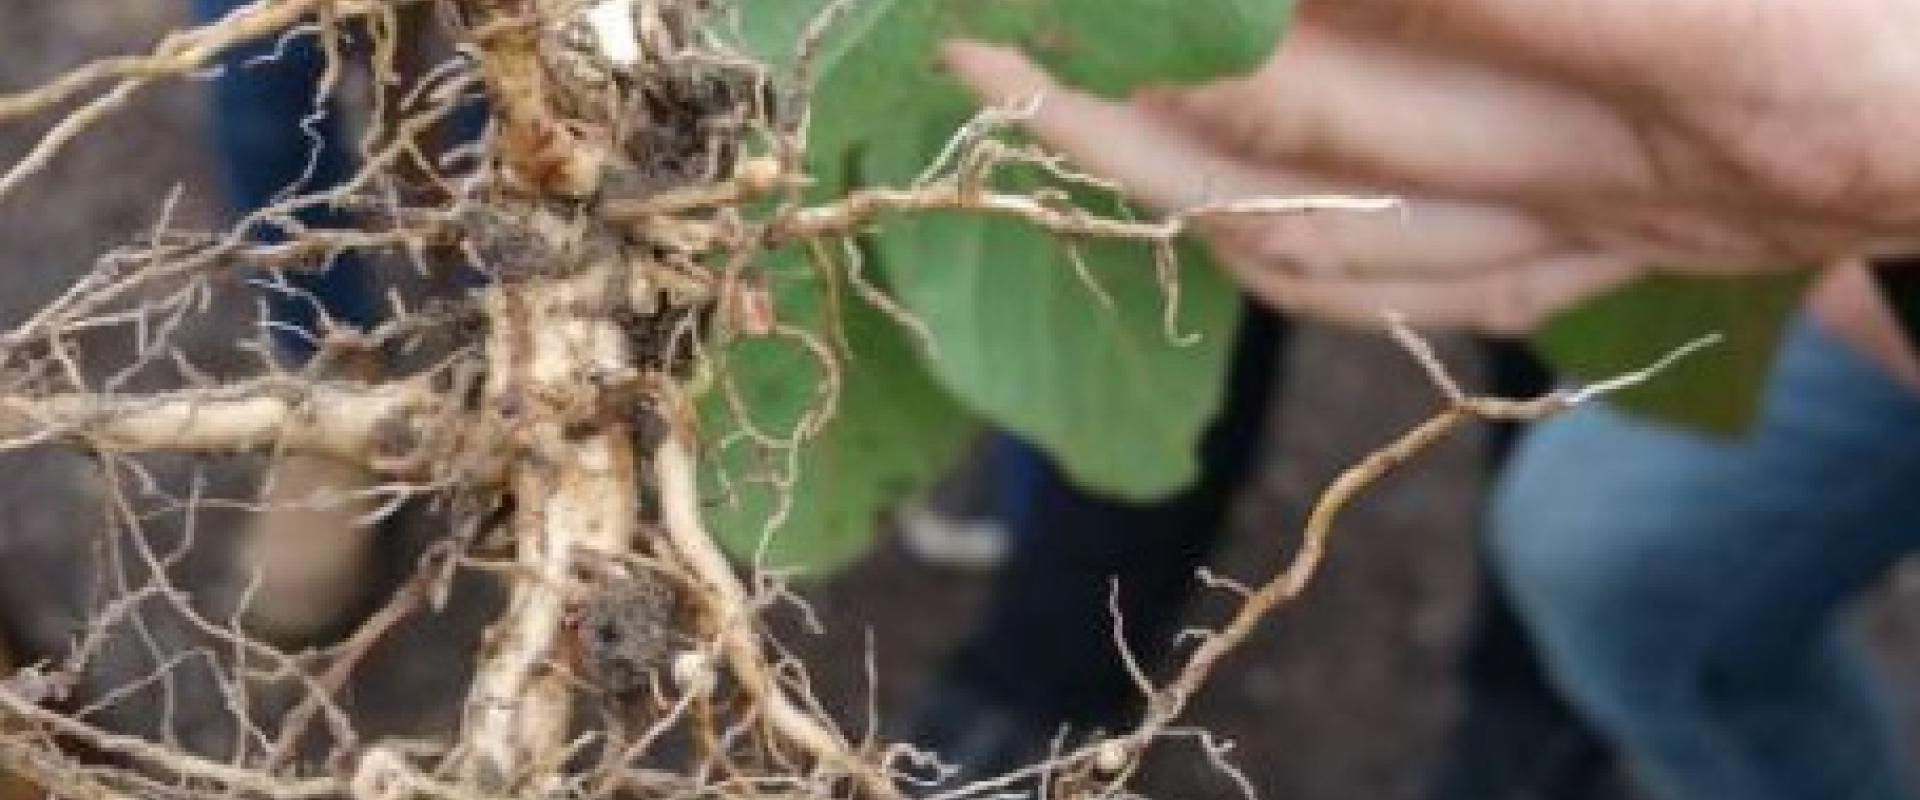 Understanding roots and agricultural produce